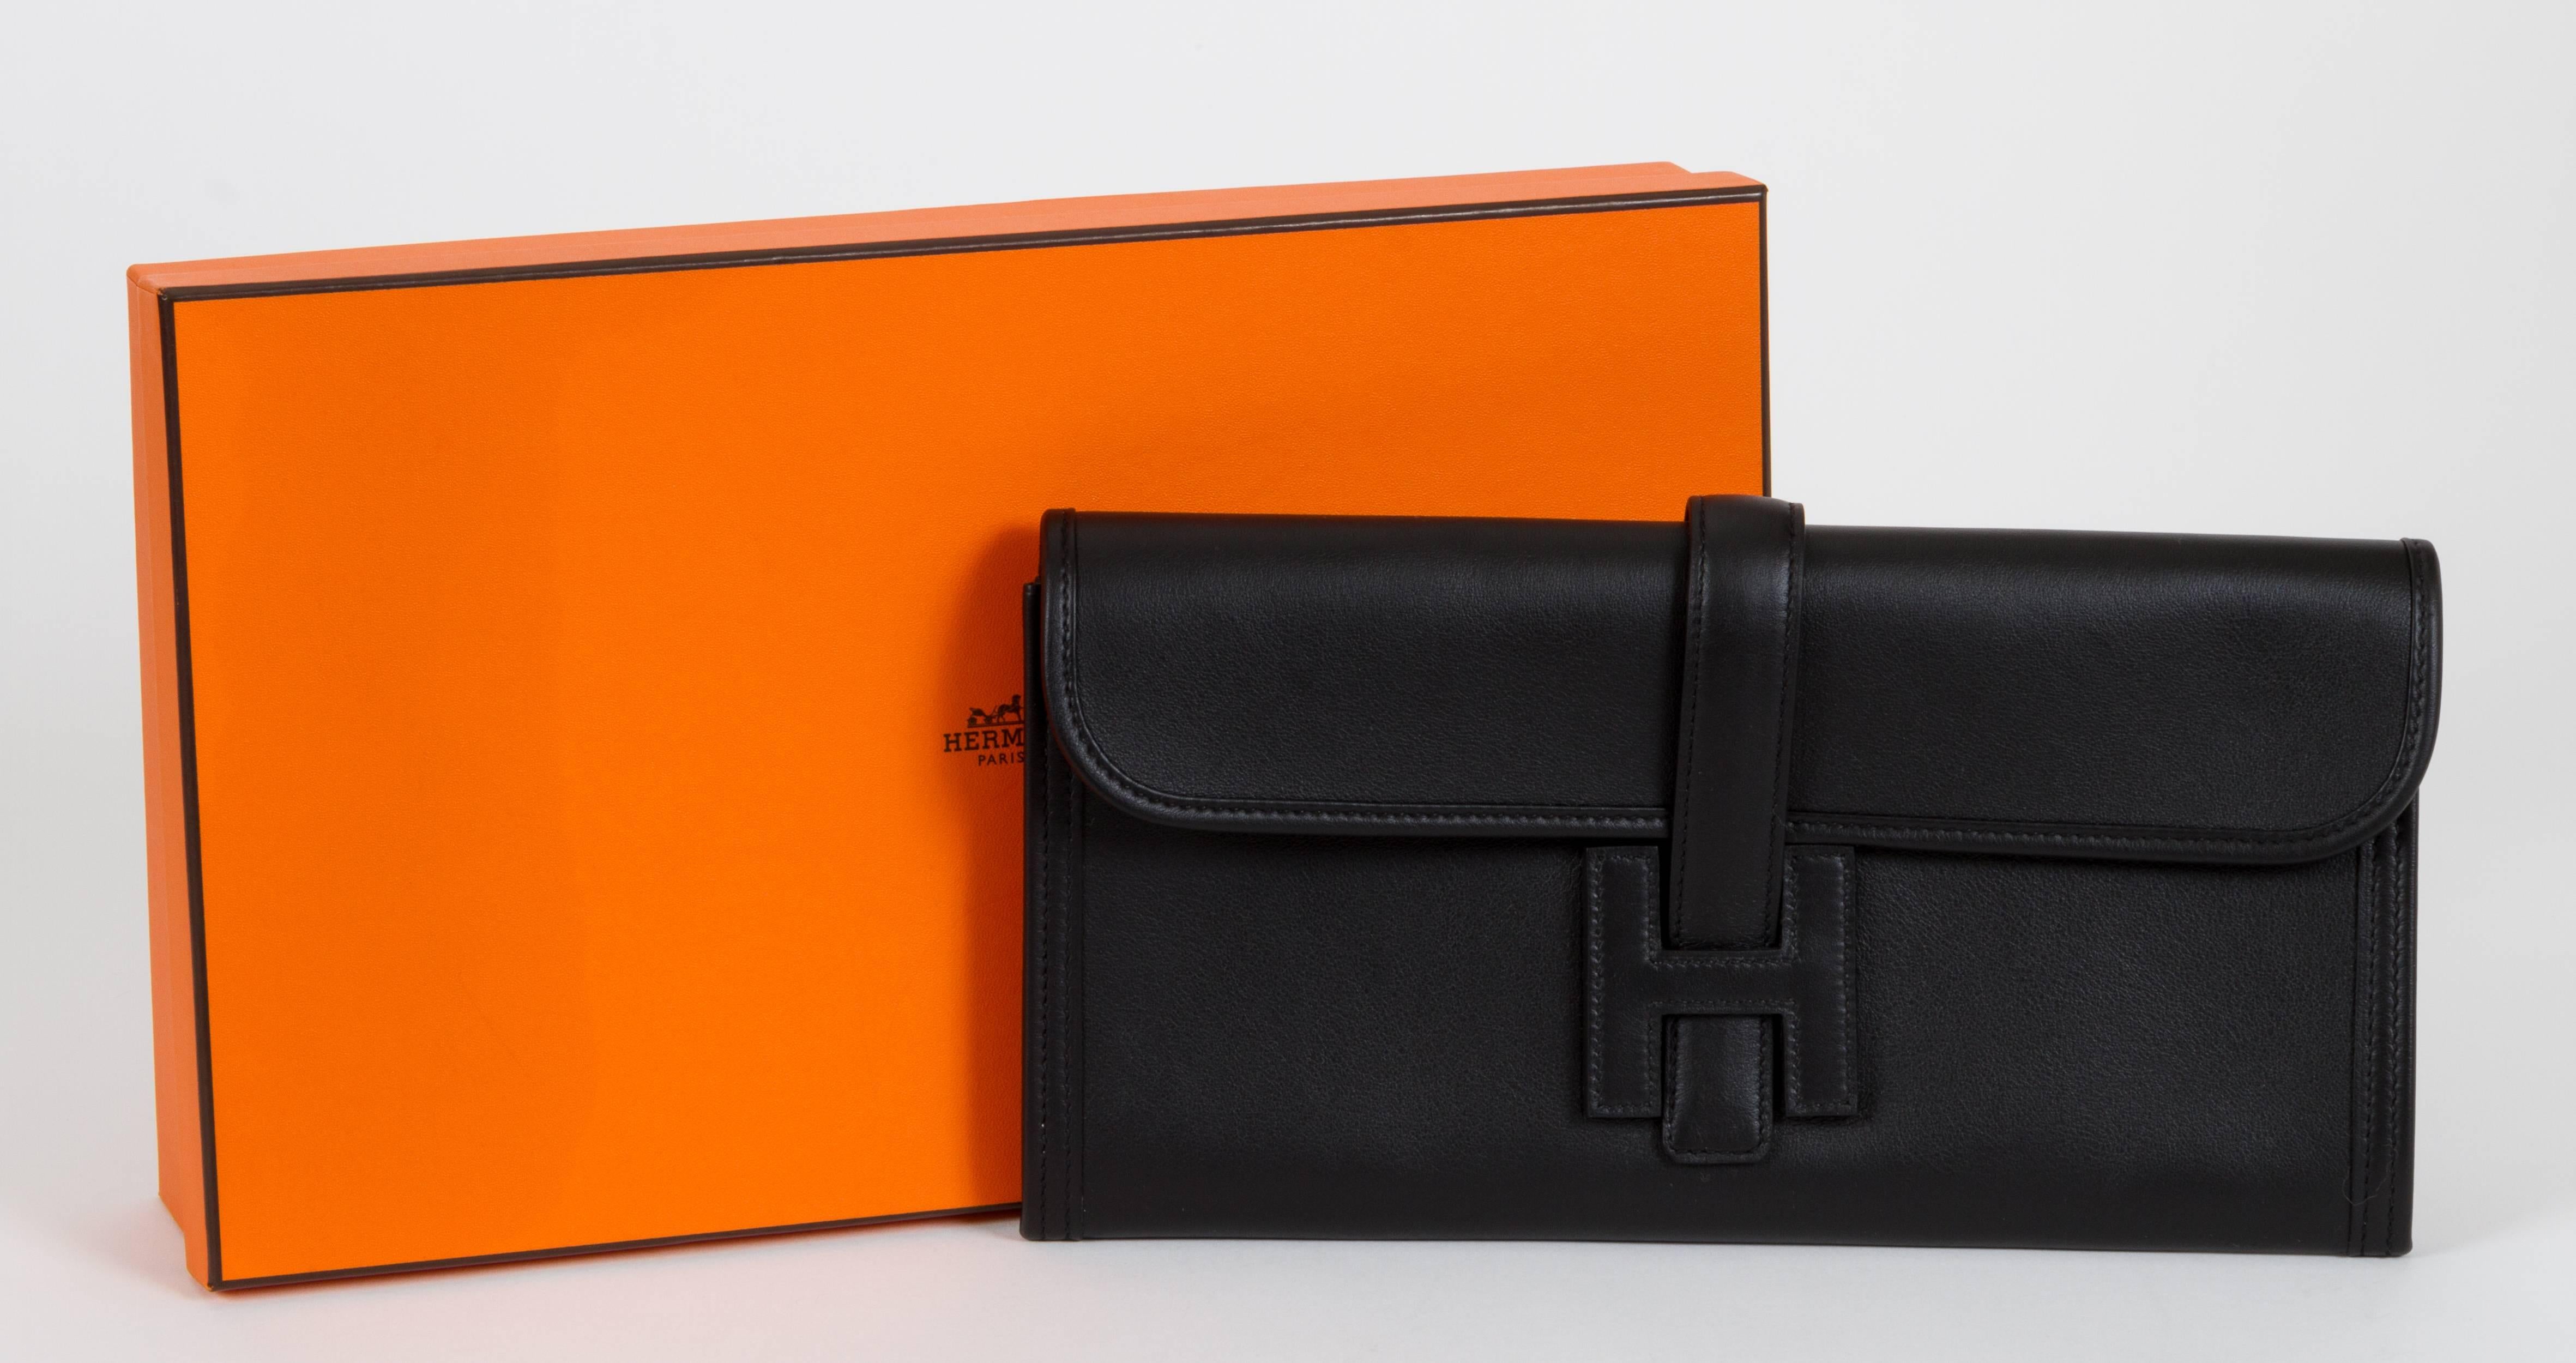 Hermès Jige clutch in black swift leather brand new in box. Letter Y for 2020. Comes with original dust bag and box .